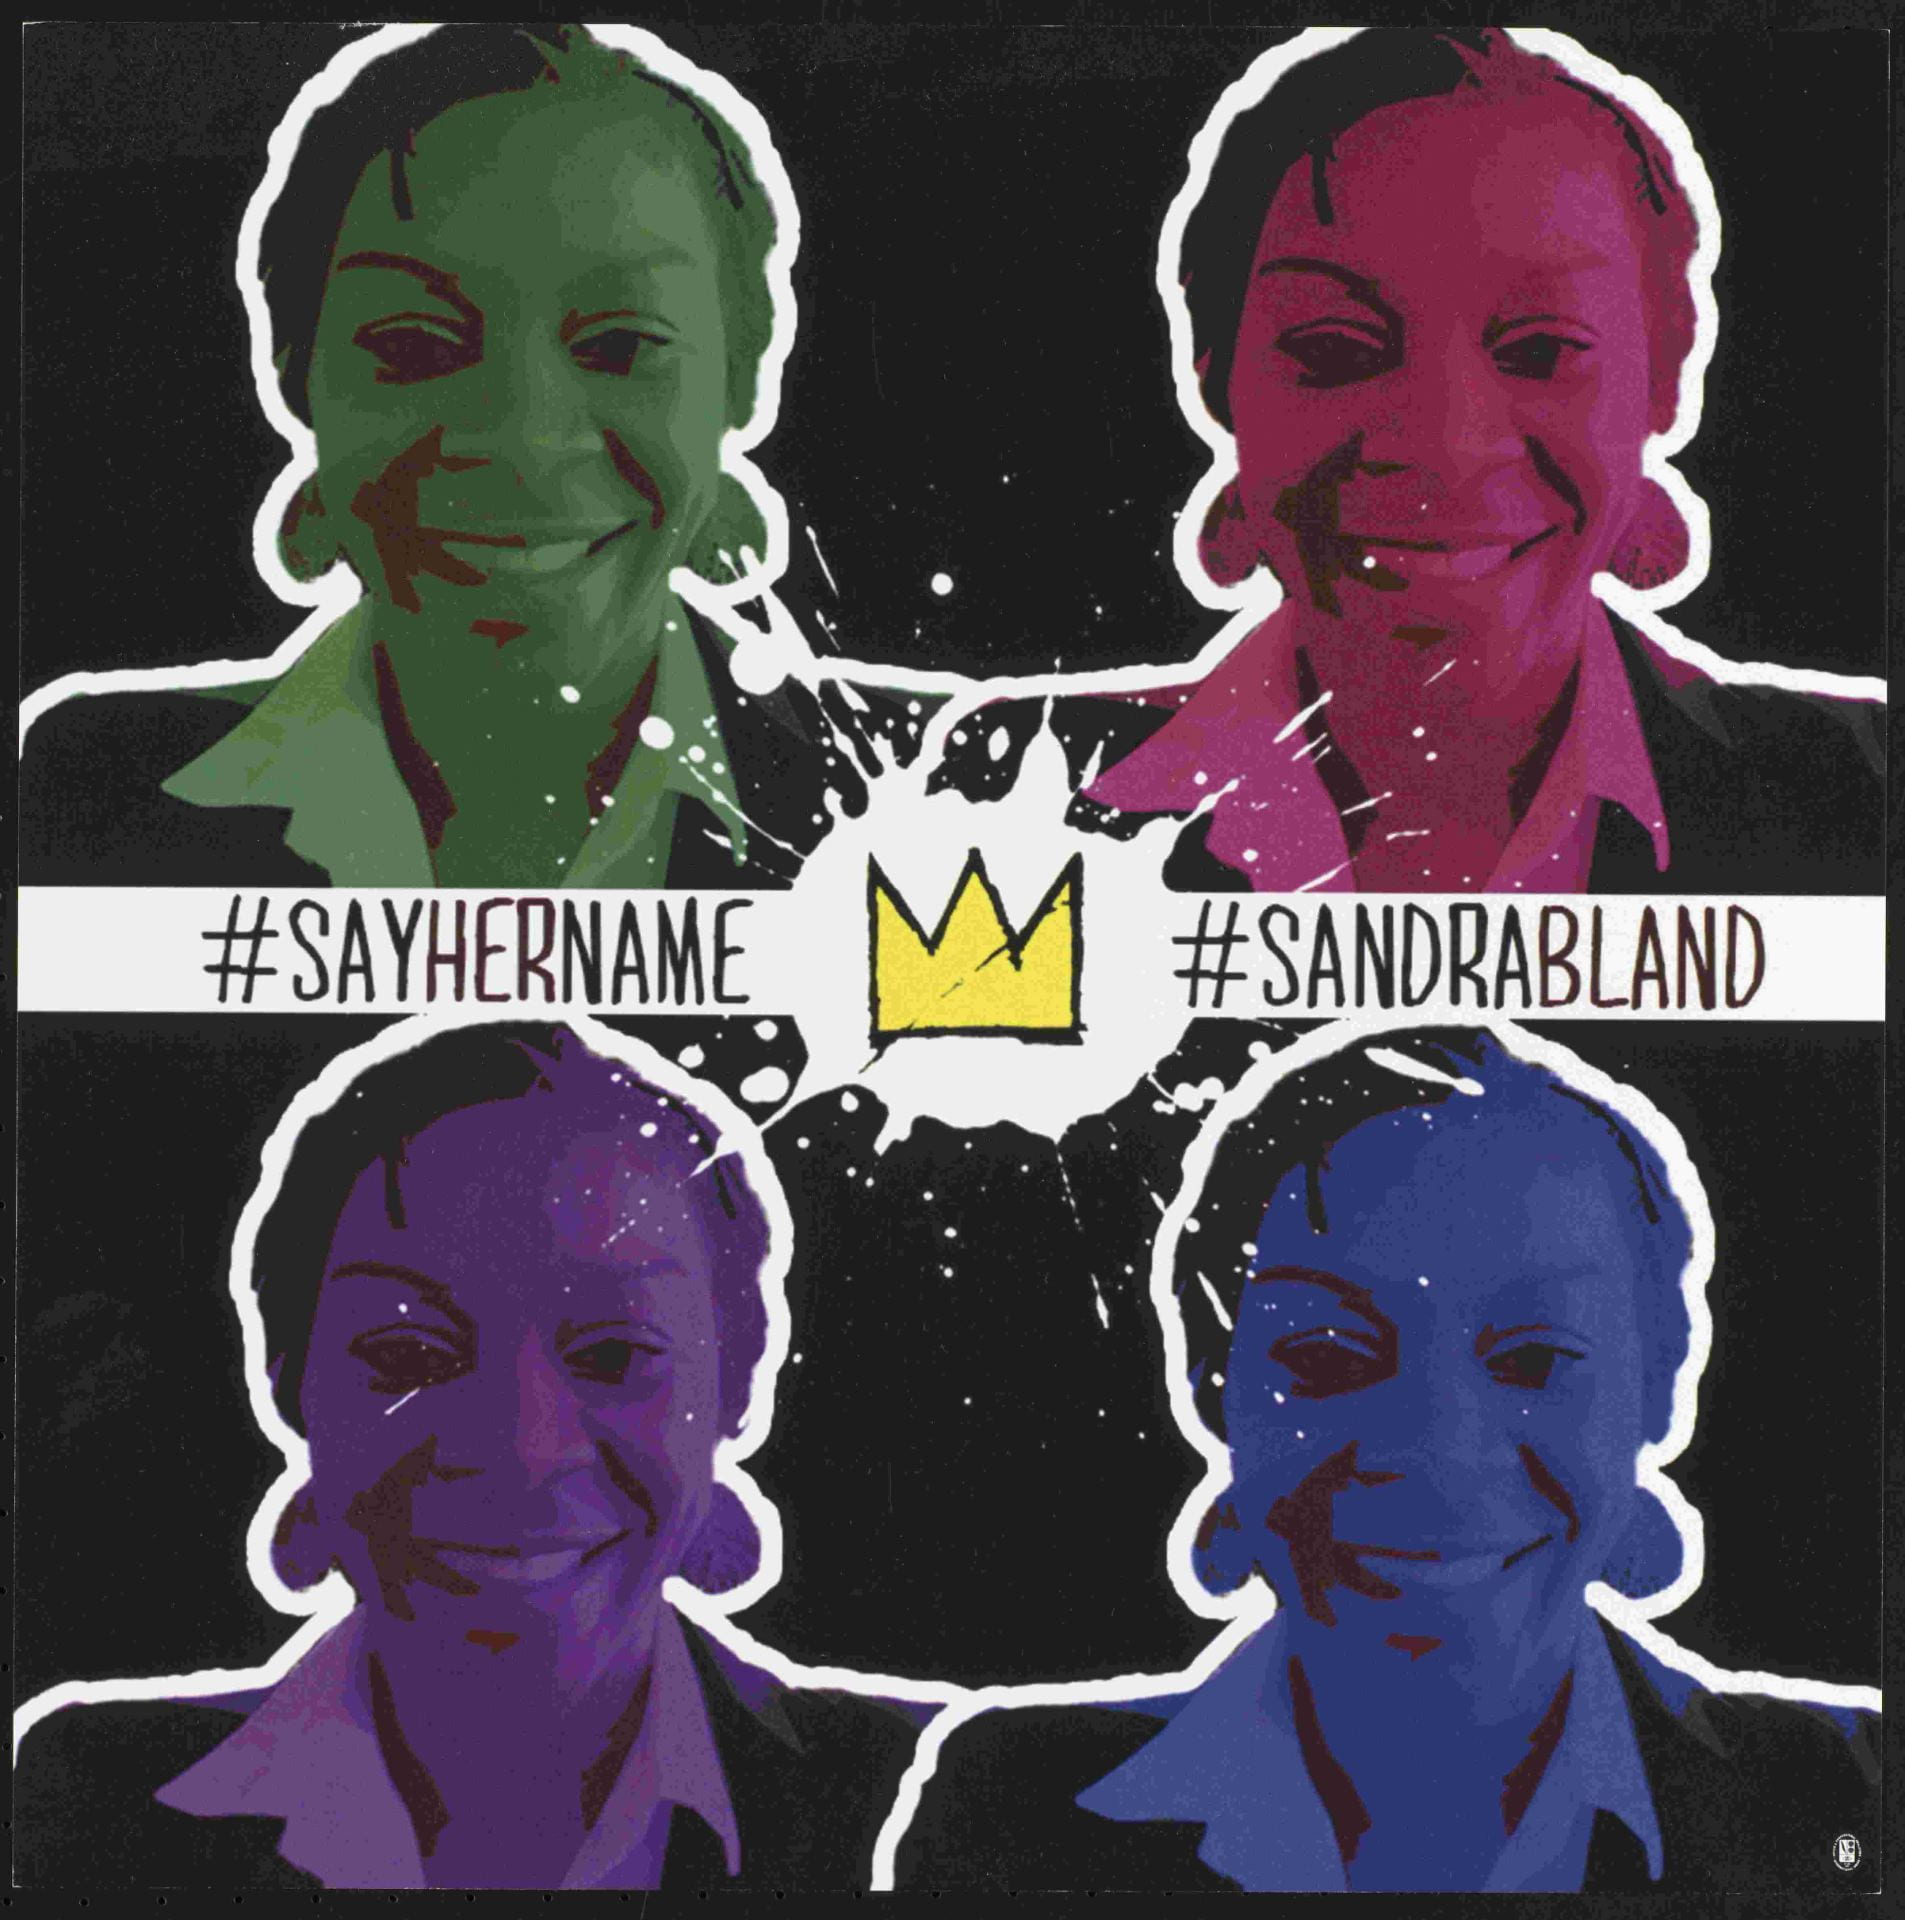 This poster draws awareness to the murder of Sandra Bland by policy brutality.